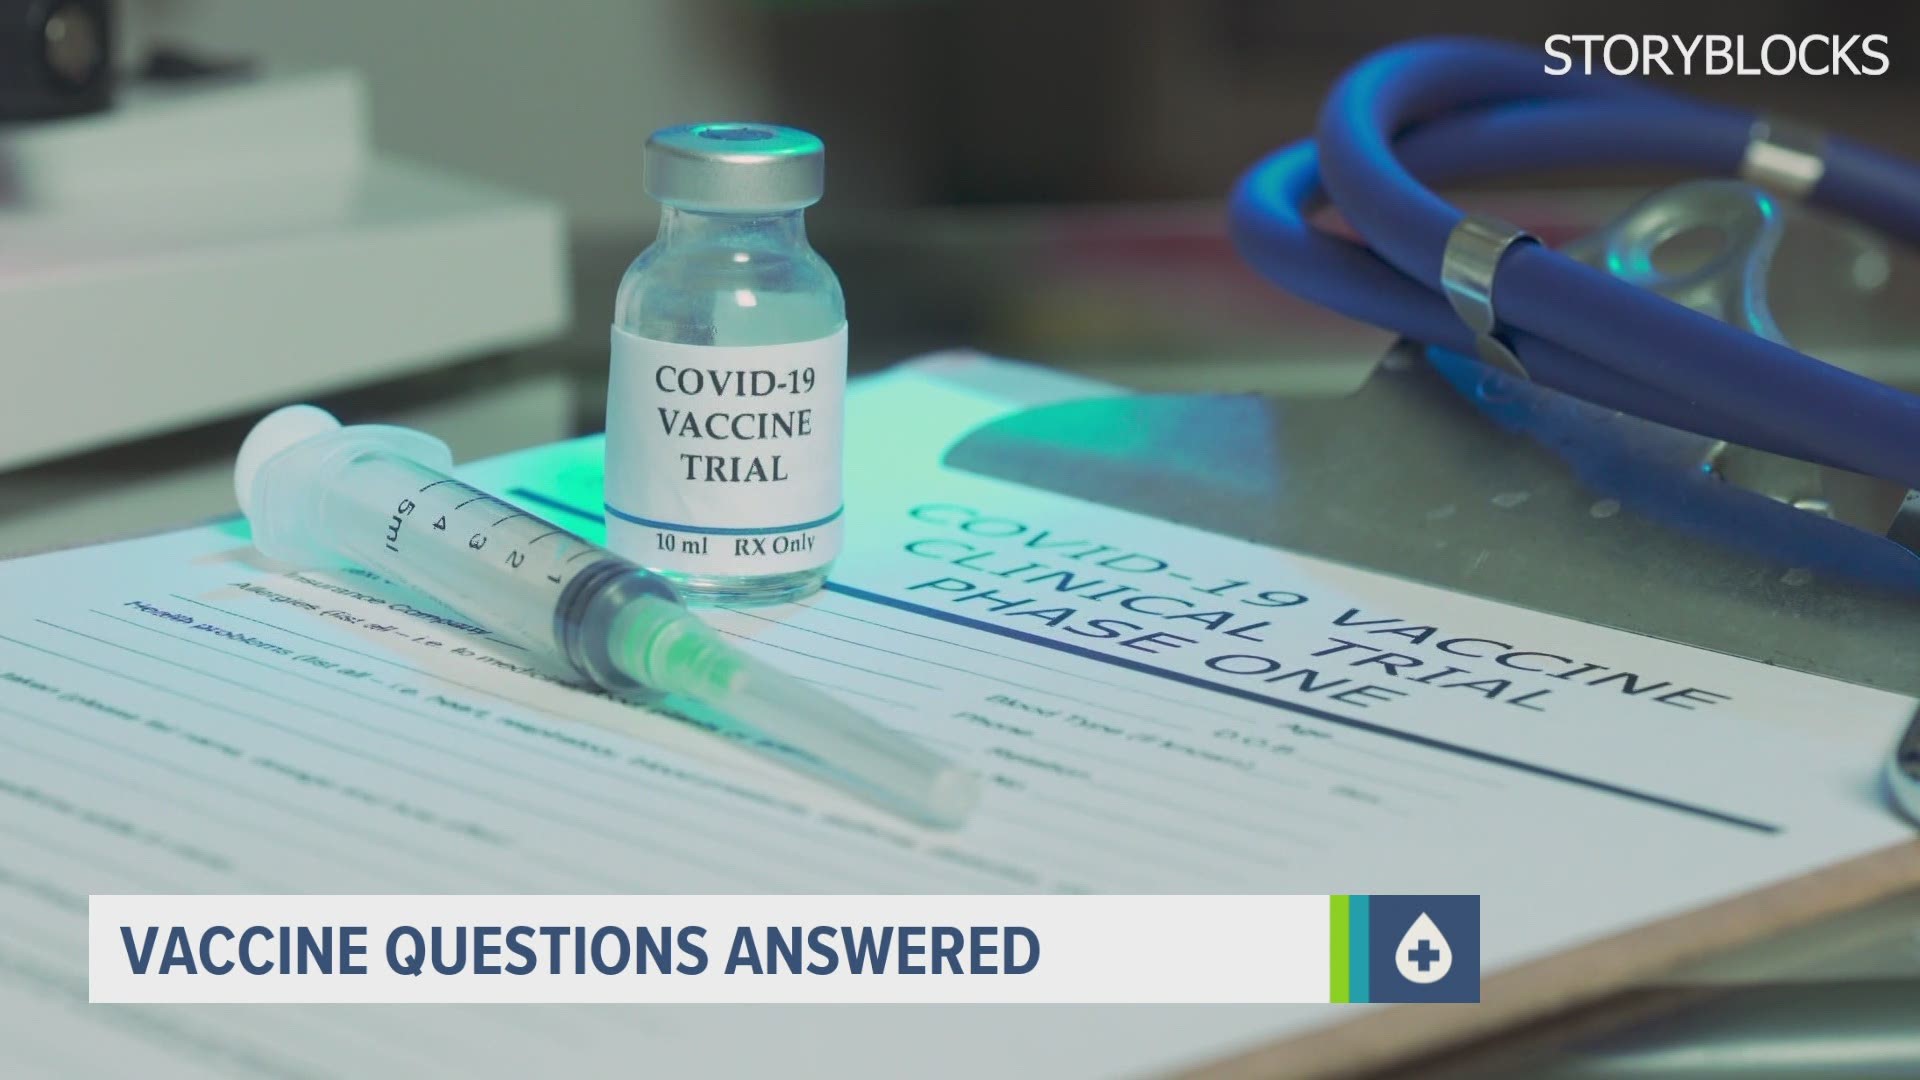 "The chances of dying from COVID are much higher than the chances of dying from the vaccine," said. Dr. Ravi Vemuri with MercyOne Des Moines Medical Center.